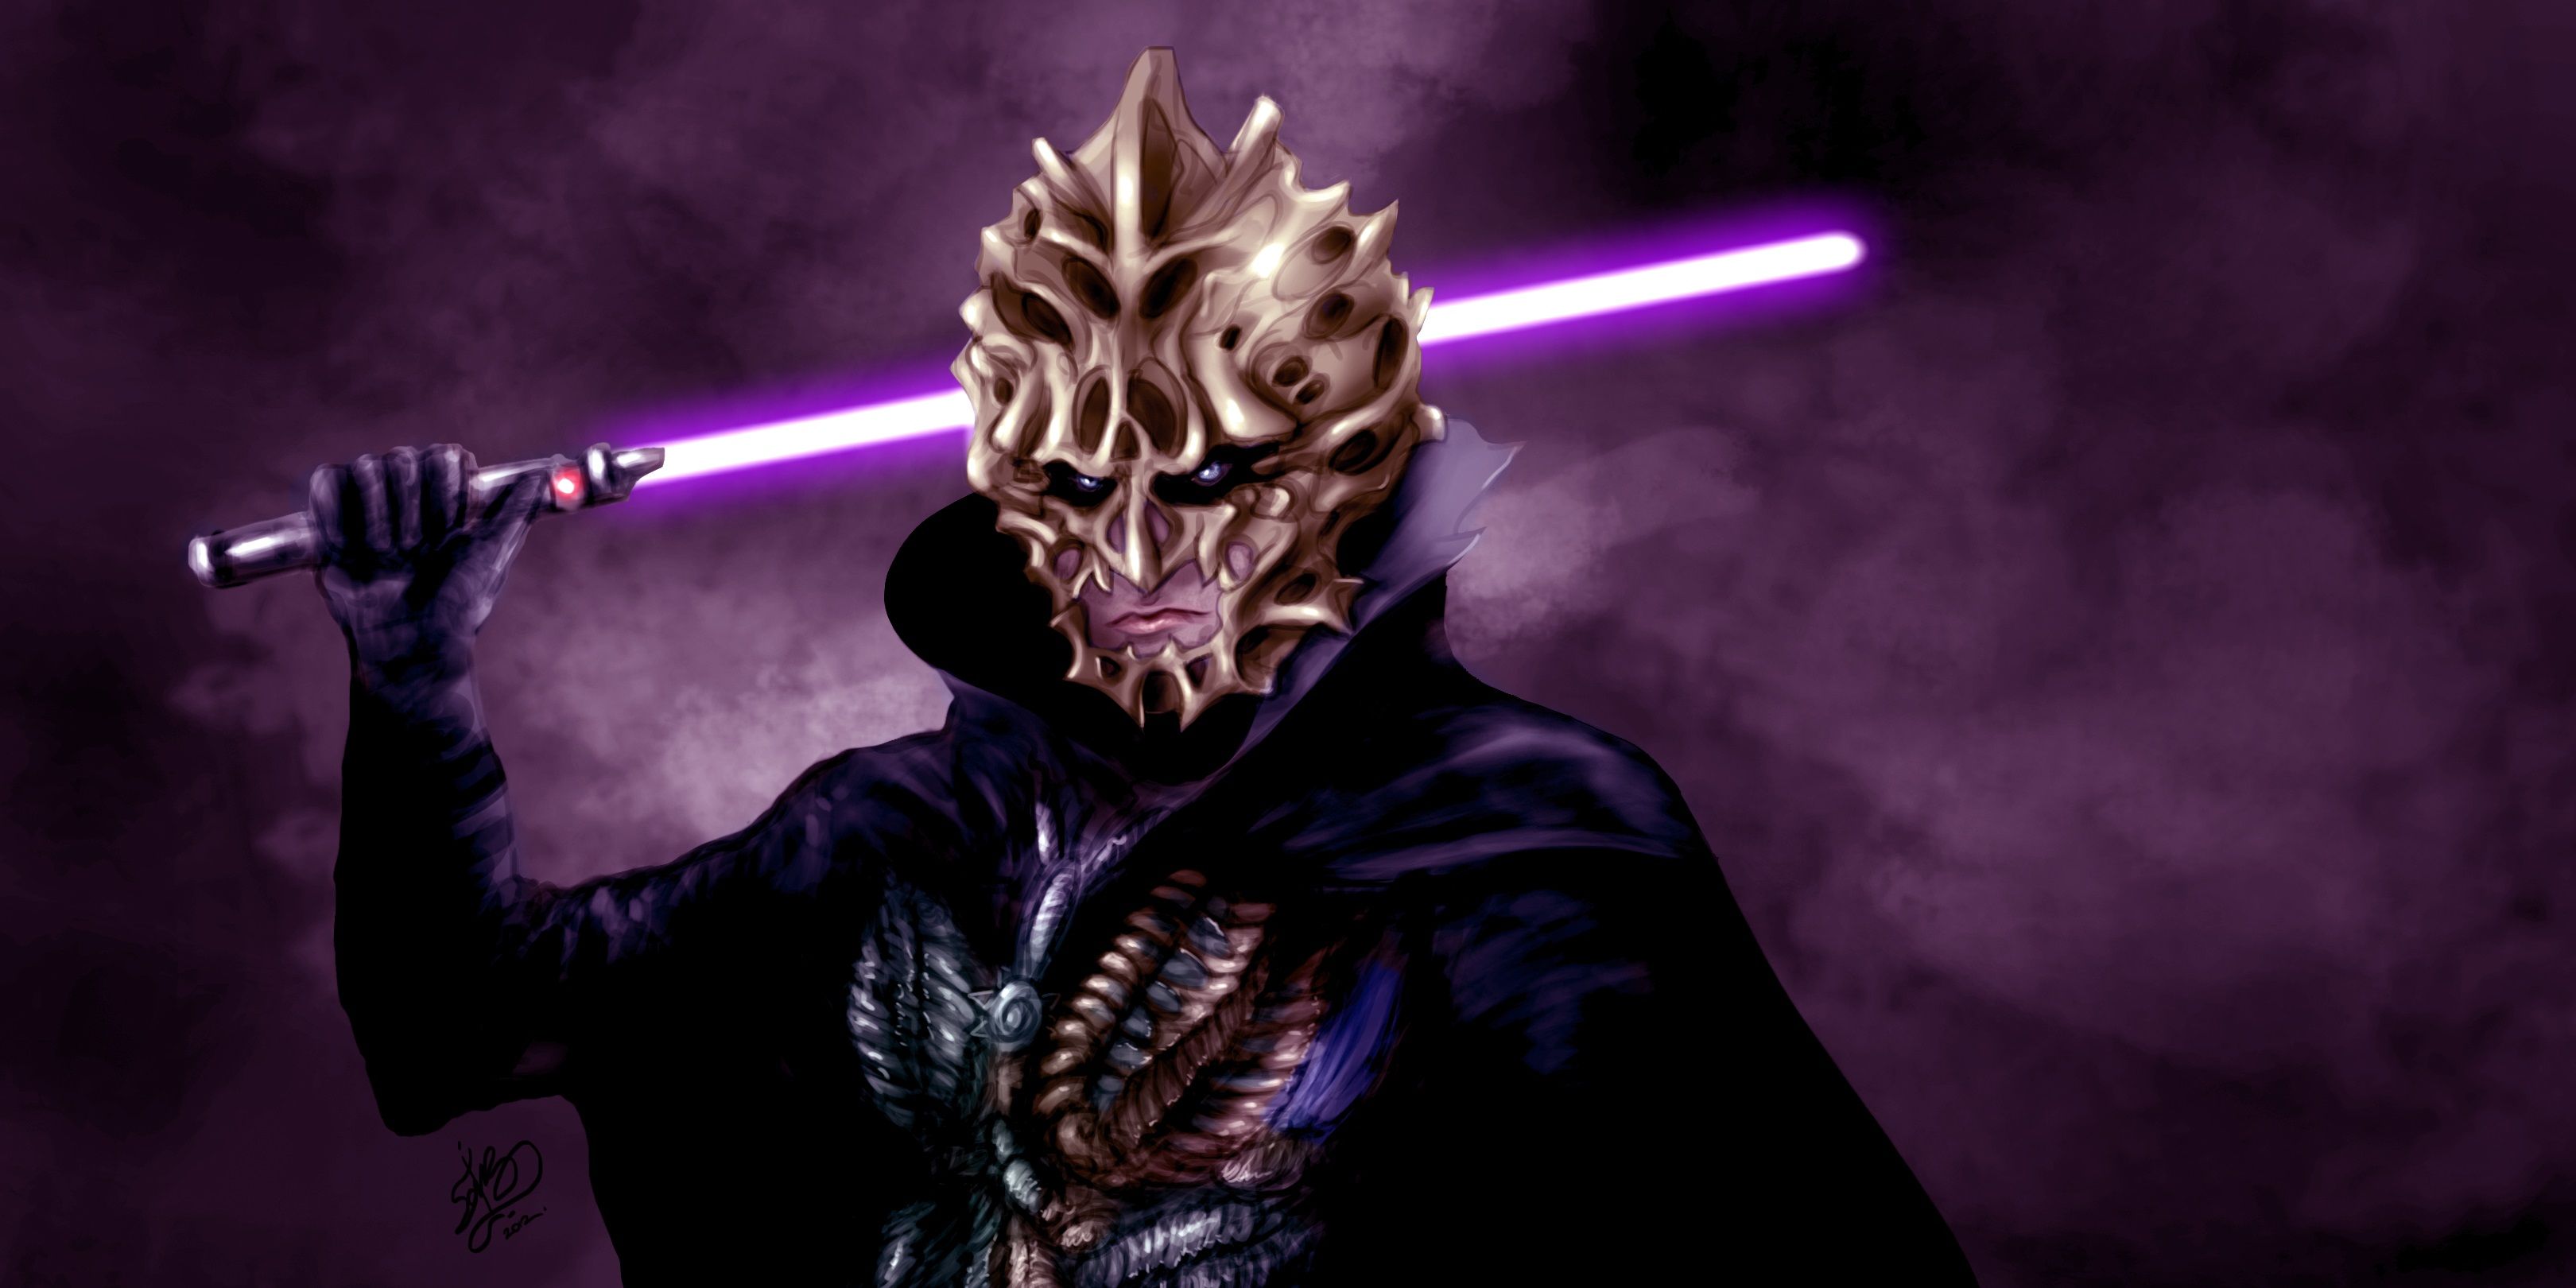 Darth Bane wearing a mask and holding a purple lightsaber